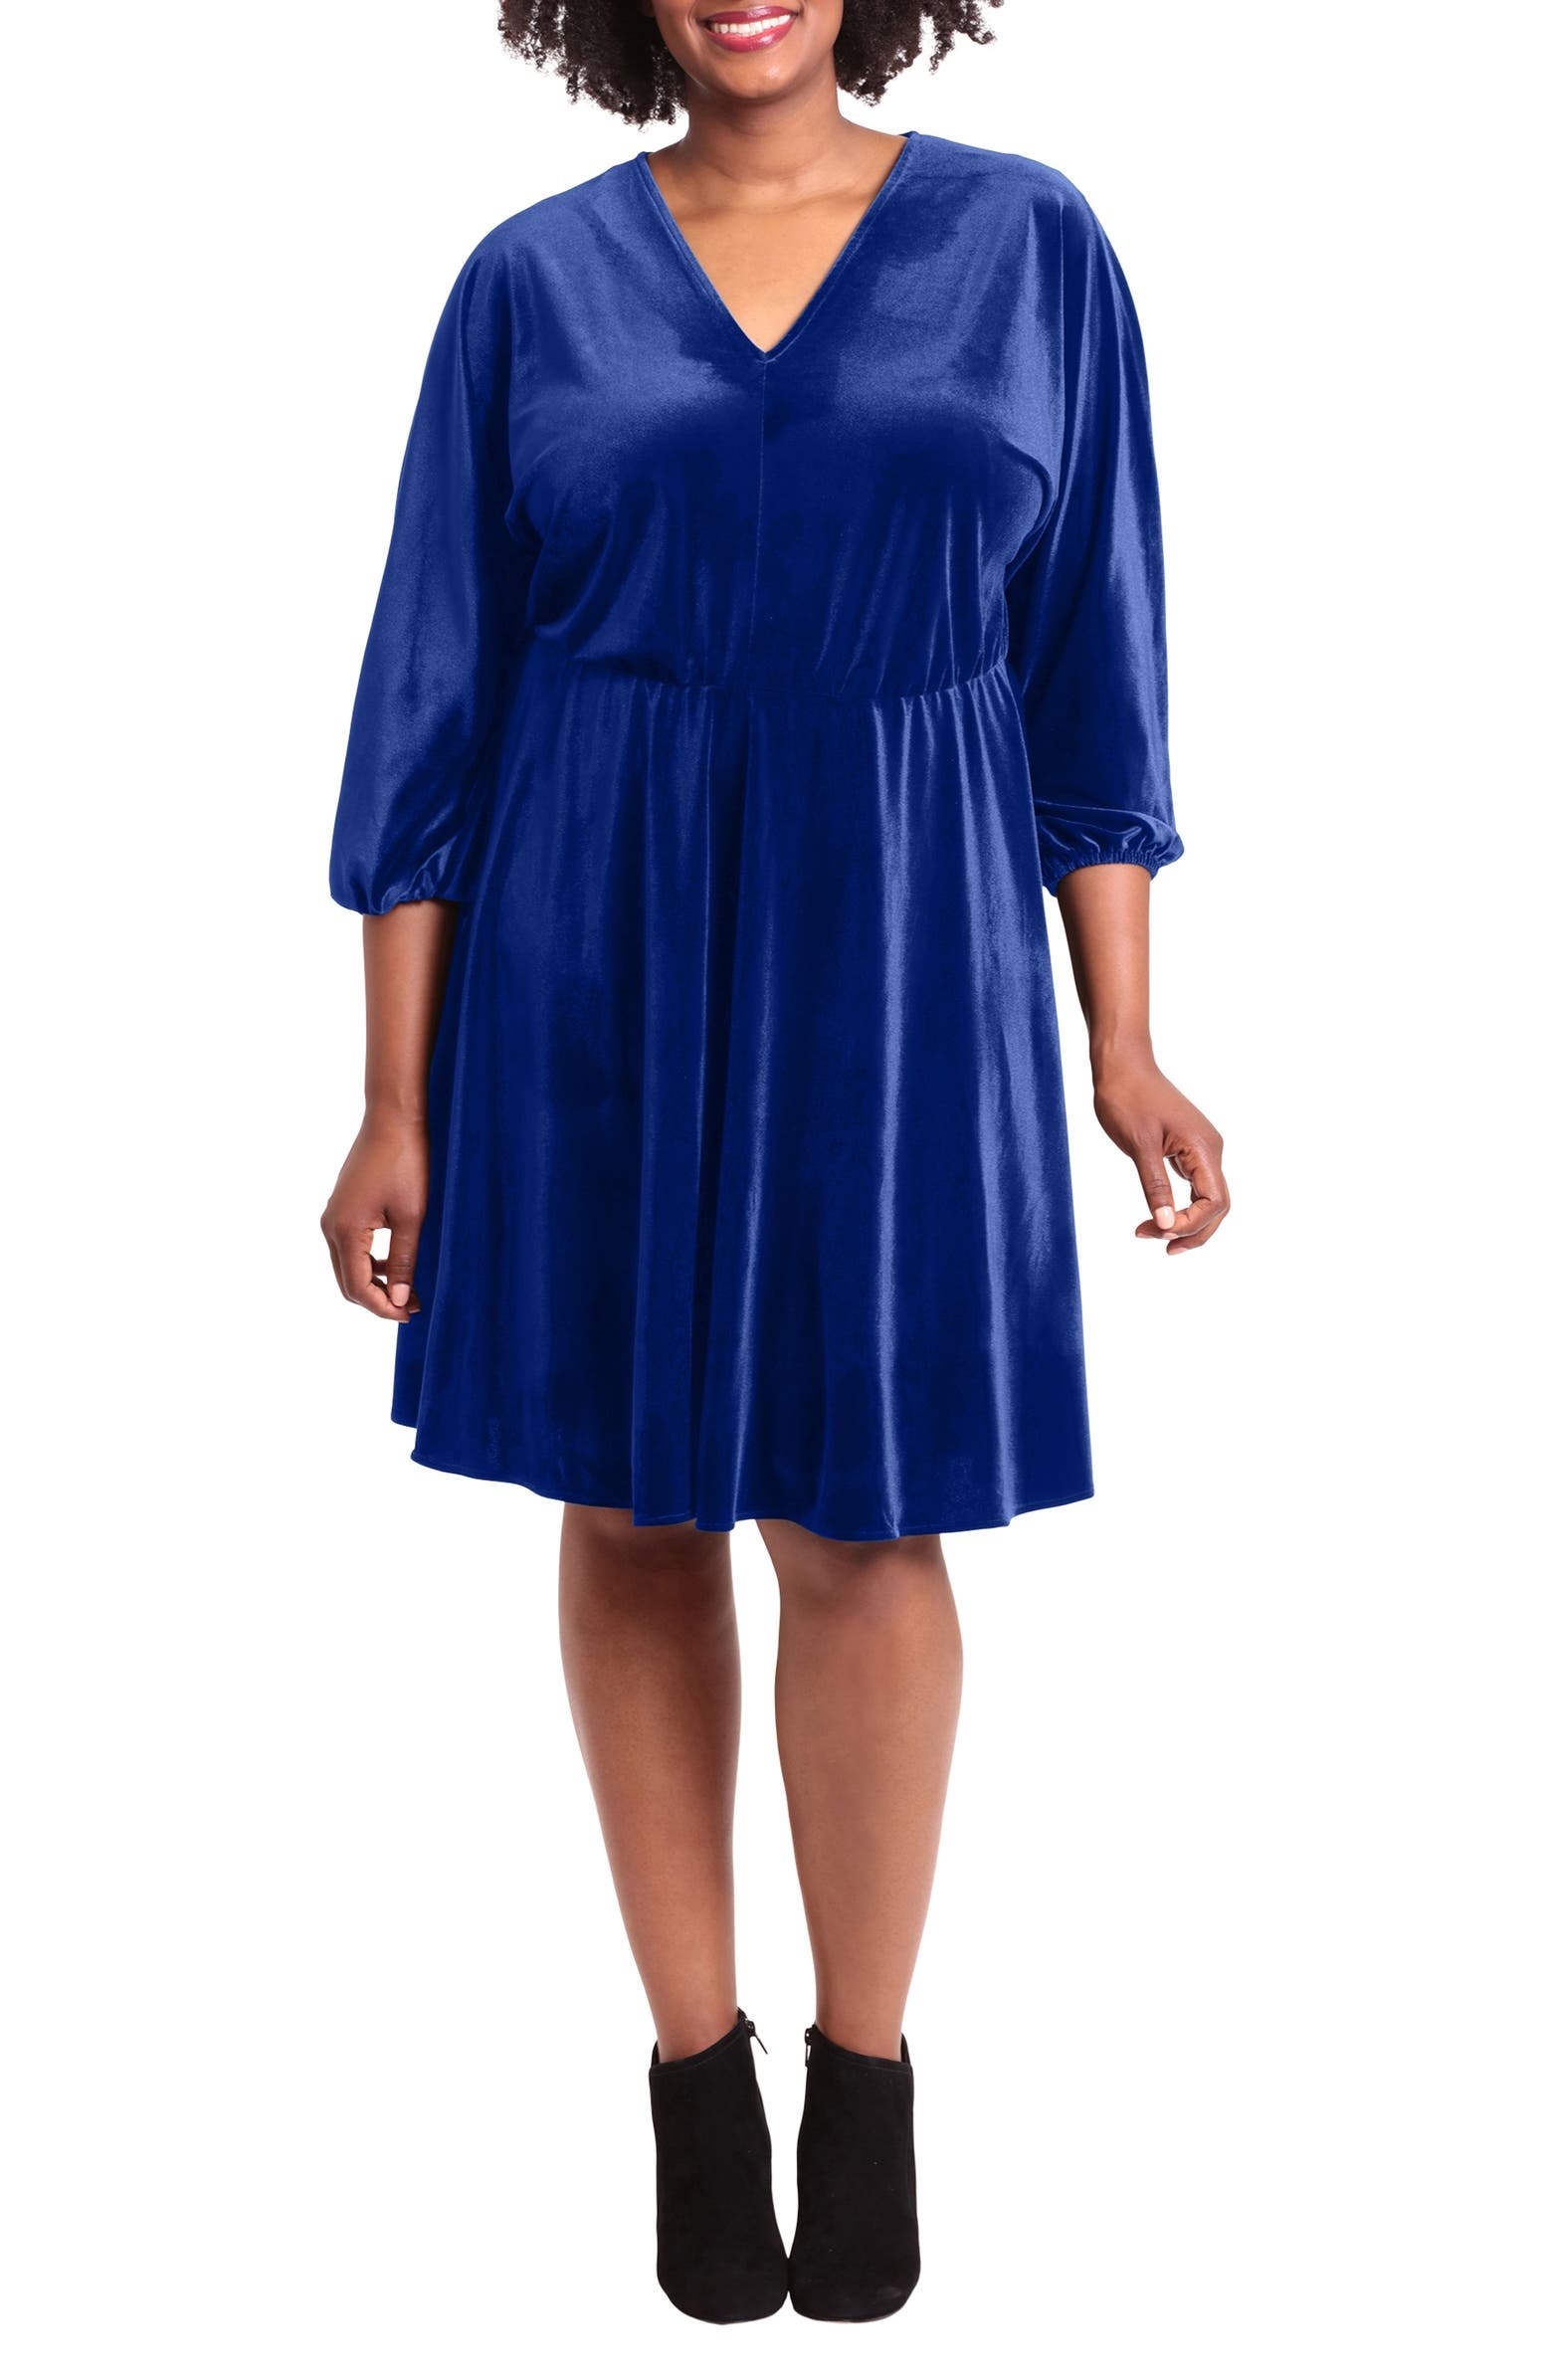 model in blue velvet knee-length dress with a v-neck and three quarter poofed sleeves